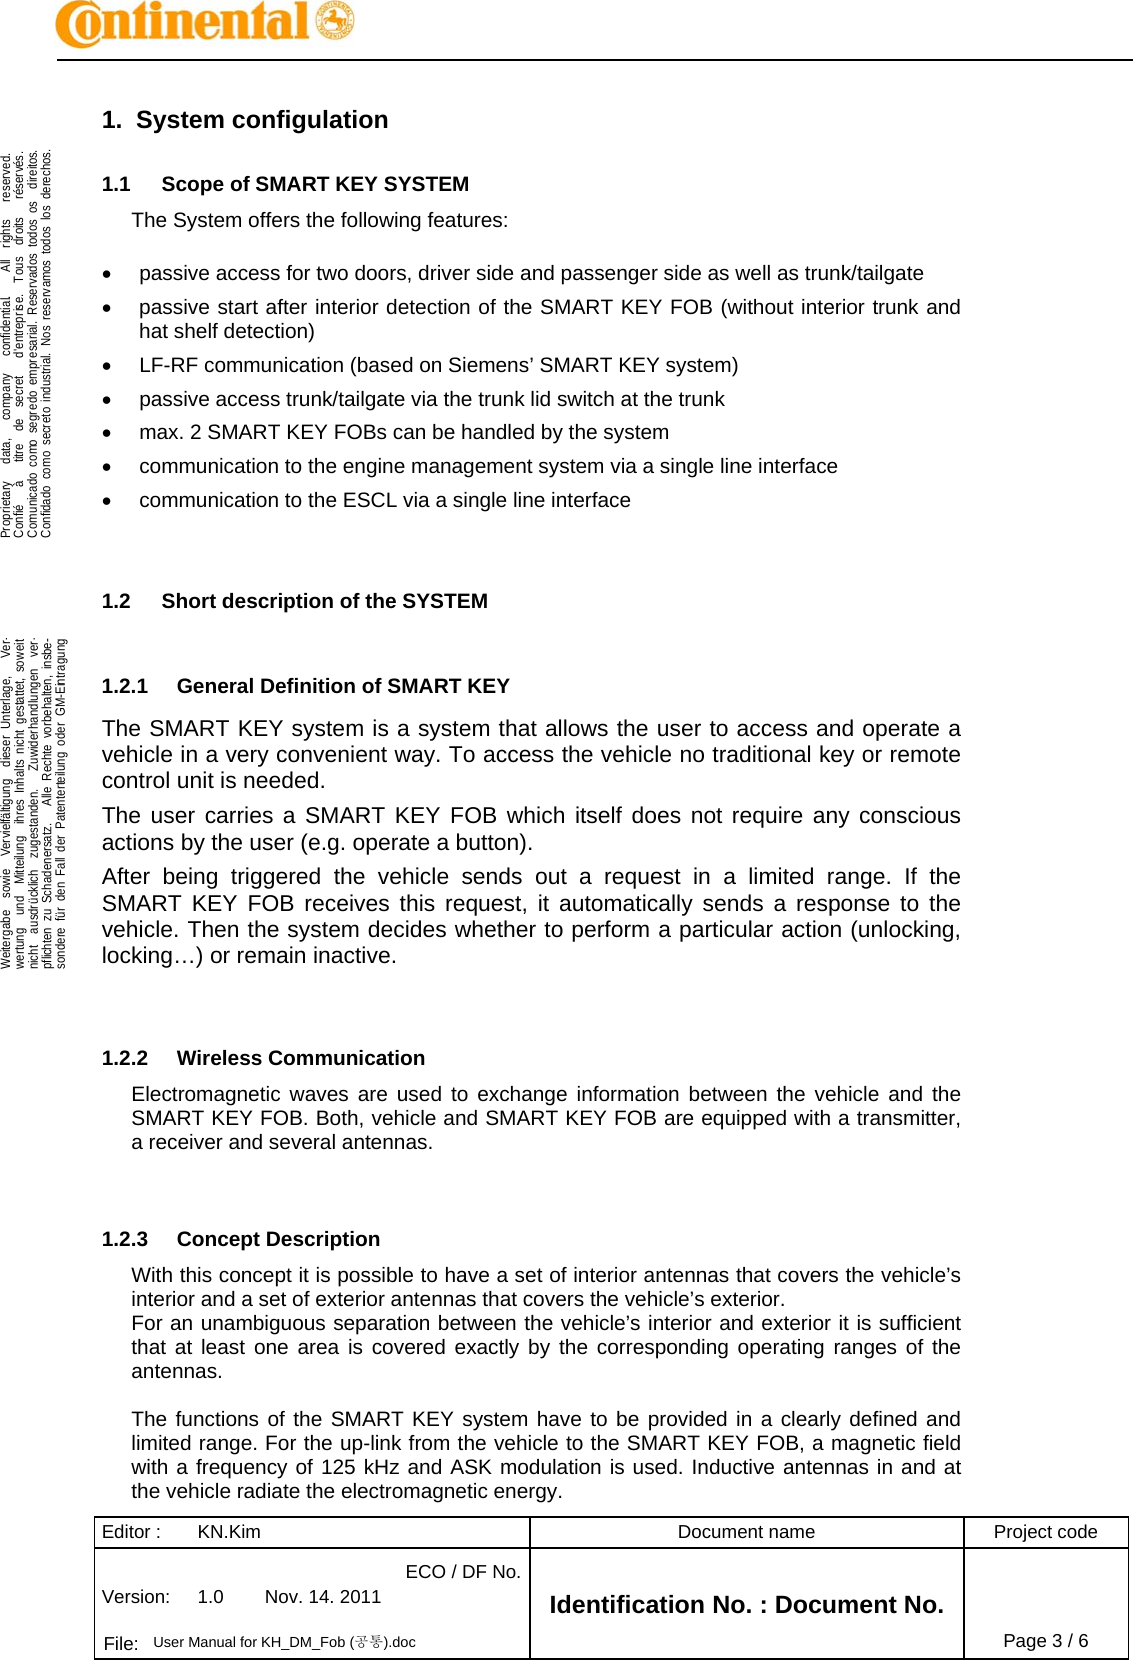 Editor :  KN.Kim  Document name  Project code Version:  1.0  Nov. 14. 2011 ECO / DF No.Identification No. : Document No.   File:  User Manual for KH_DM_Fob (공통).doc Page 3 / 6    .Proprietary   data,   company   confidential.    All  rights   reserved.Confié   à   titre  de  secret   d&apos;entreprise.  Tous  droits   réservés.Com arial  todos os os.Conf Nos  todos los os.  .Weitergabe  sowie  Vervielfältigung  dieser Unterlage,   Verunicadidado o comcomo o segr secret edo o indusemprestrial.  . Rese reservrvadosamos   direit derech-wertung  und  Mitteilung  ihres Inhalts nicht gestattet, soweitnicht  ausdrücklich  zugestanden.   Zuwiderhandl   verungen-pflichten zu Schadenersatz.   Alle Rechte vorbehal nsbe-sondere für den Fall der Patenterteilung oder GM agung  ten, i-Eintr1.2.1  General Definition of SMART KEY 1.  System configulation 1.1  Scope of SMART KEY SYSTEM The System offers the following features:  •  passive access for two doors, driver side and passenger side as well as trunk/tailgate •  passive start after interior detection of the SMART KEY FOB (without interior trunk and hat shelf detection) •  LF-RF communication (based on Siemens’ SMART KEY system) •  passive access trunk/tailgate via the trunk lid switch at the trunk •  max. 2 SMART KEY FOBs can be handled by the system •  communication to the engine management system via a single line interface •  communication to the ESCL via a single line interface   1.2  Short description of the SYSTEM  The SMART KEY system is a system that allows the user to access and operate a vehicle in a very convenient way. To access the vehicle no traditional key or remote control unit is needed.  The user carries a SMART KEY FOB which itself does not require any conscious actions by the user (e.g. operate a button).  After being triggered the vehicle sends out a request in a limited range. If the SMART KEY FOB receives this request, it automatically sends a response to the vehicle. Then the system decides whether to perform a particular action (unlocking, locking…) or remain inactive.   1.2.2  Wireless Communication Electromagnetic waves are used to exchange information between the vehicle and the SMART KEY FOB. Both, vehicle and SMART KEY FOB are equipped with a transmitter, a receiver and several antennas.    1.2.3  Concept Description With this concept it is possible to have a set of interior antennas that covers the vehicle’s interior and a set of exterior antennas that covers the vehicle’s exterior. For an unambiguous separation between the vehicle’s interior and exterior it is sufficient that at least one area is covered exactly by the corresponding operating ranges of the antennas.  The functions of the SMART KEY system have to be provided in a clearly defined and limited range. For the up-link from the vehicle to the SMART KEY FOB, a magnetic field with a frequency of 125 kHz and ASK modulation is used. Inductive antennas in and at the vehicle radiate the electromagnetic energy. 